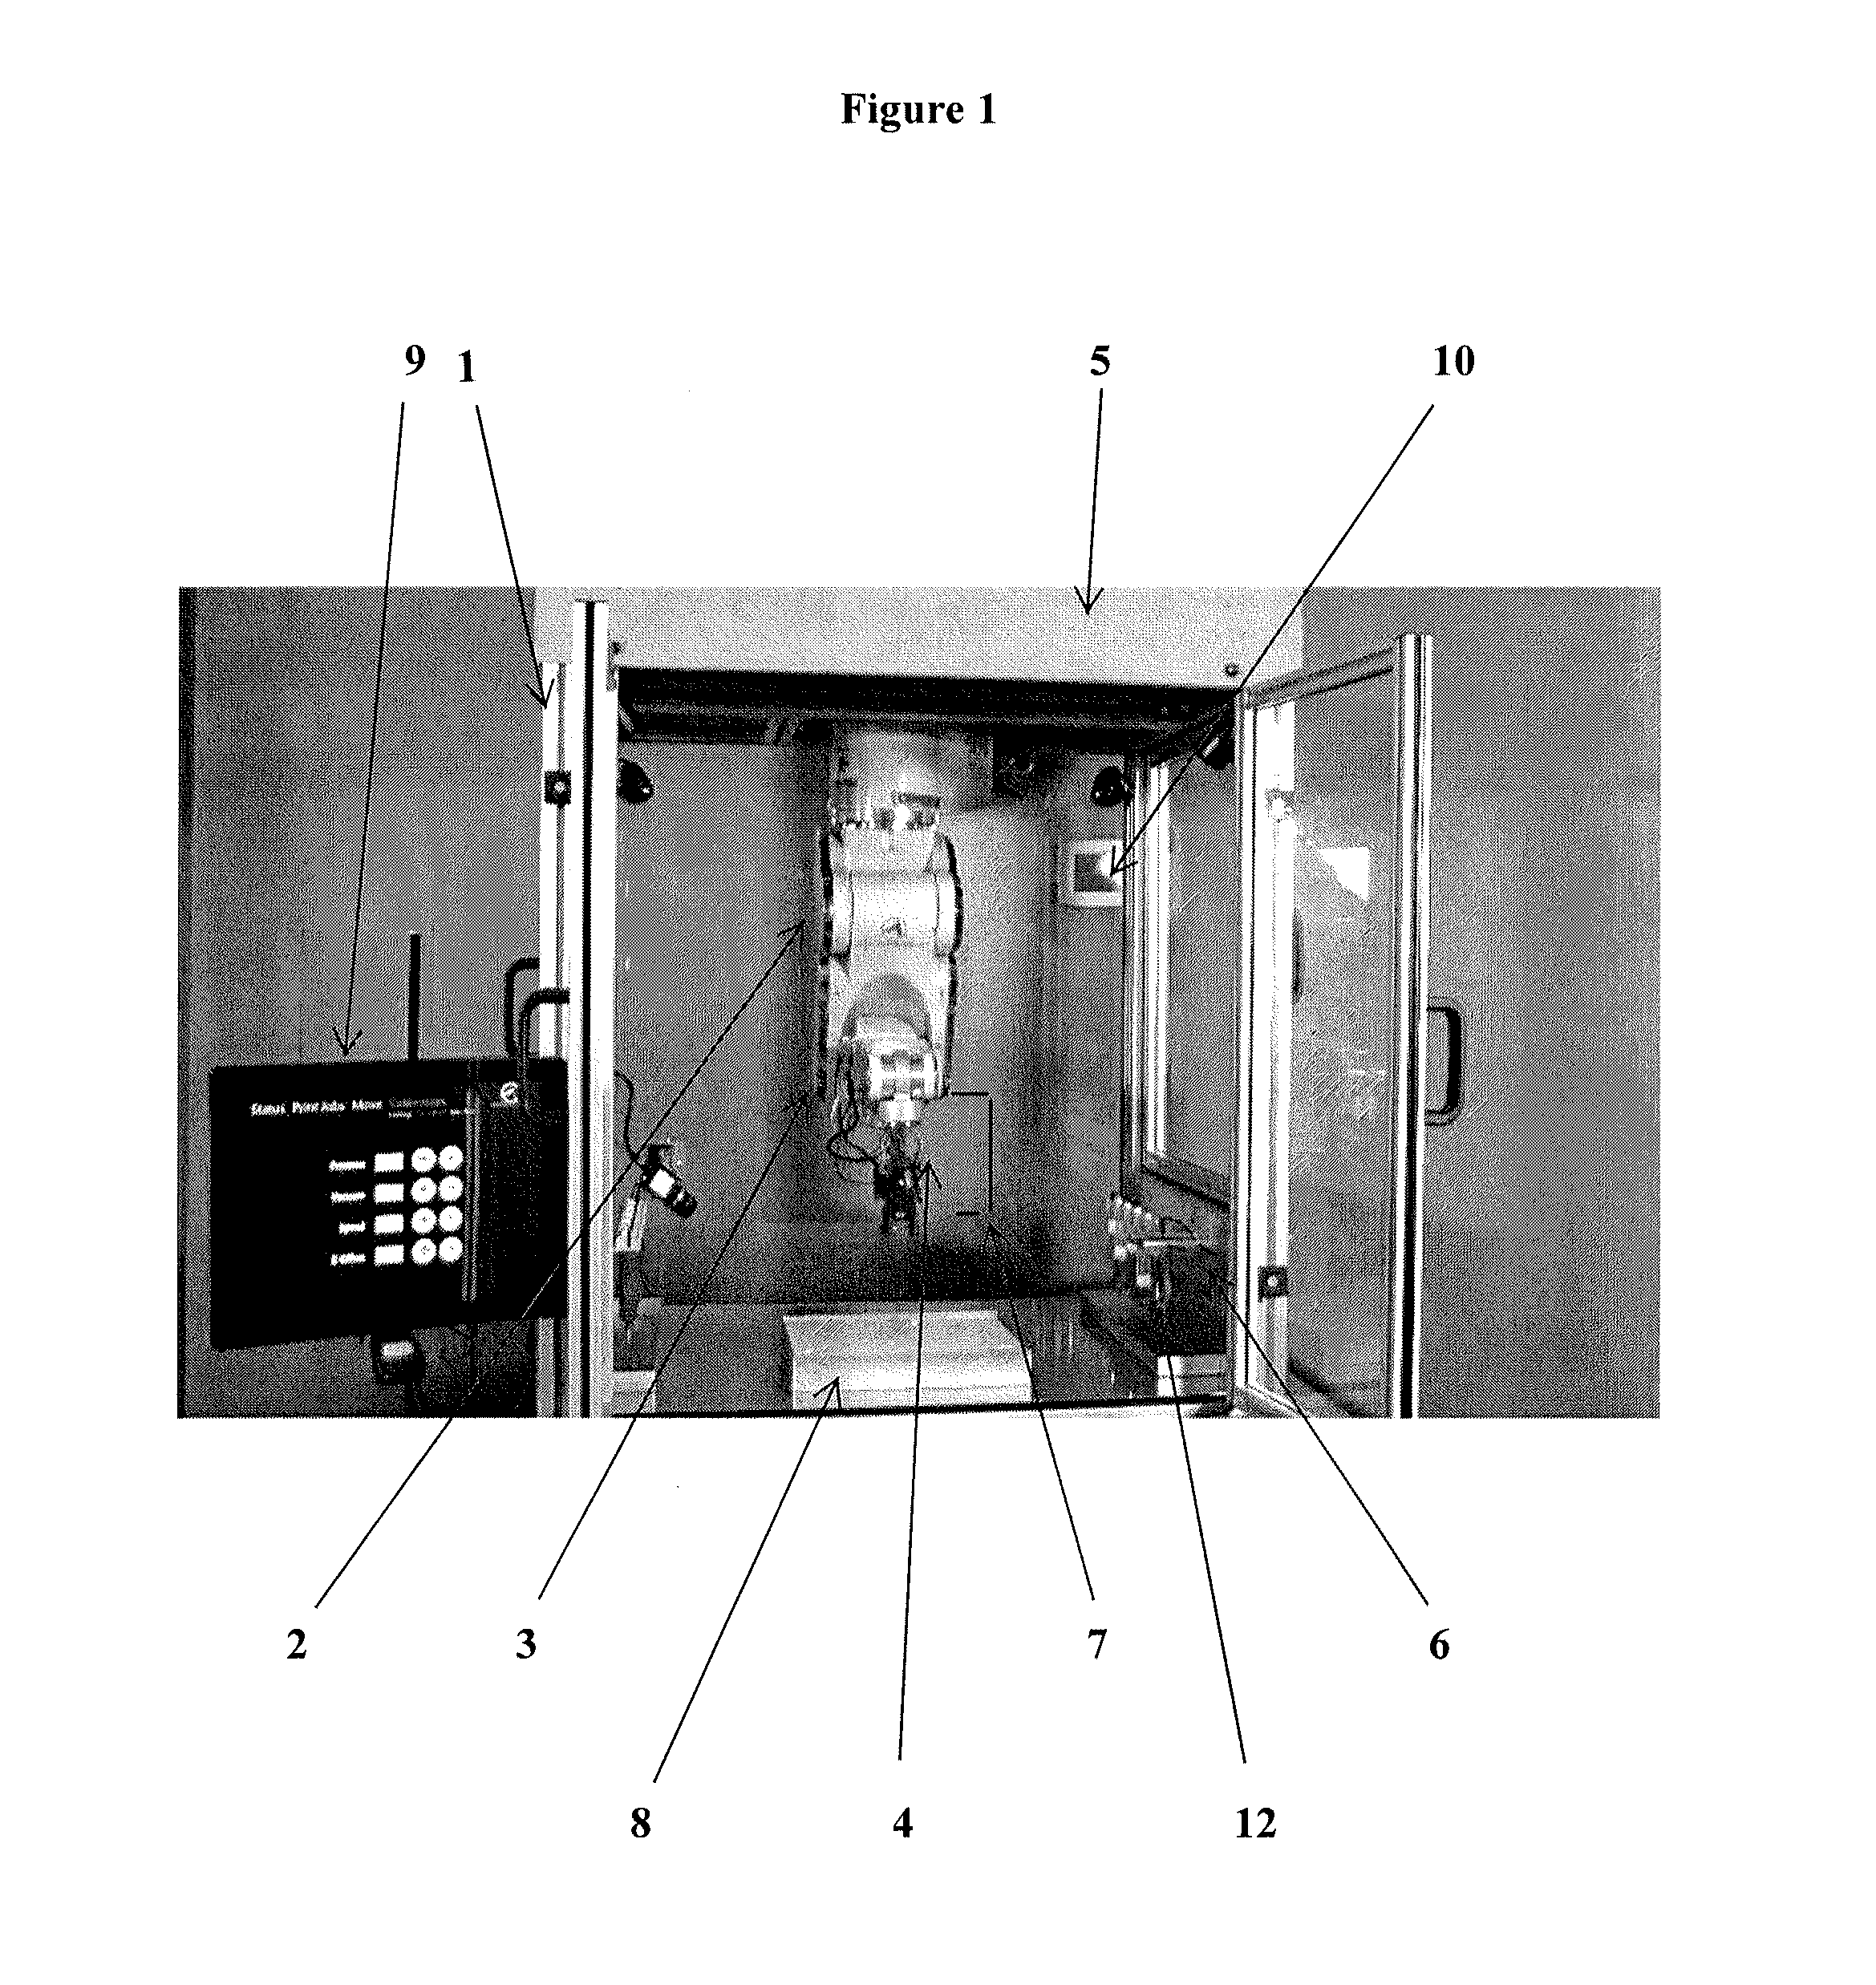 System and workstation for the design, fabrication and assembly of bio-material constructs